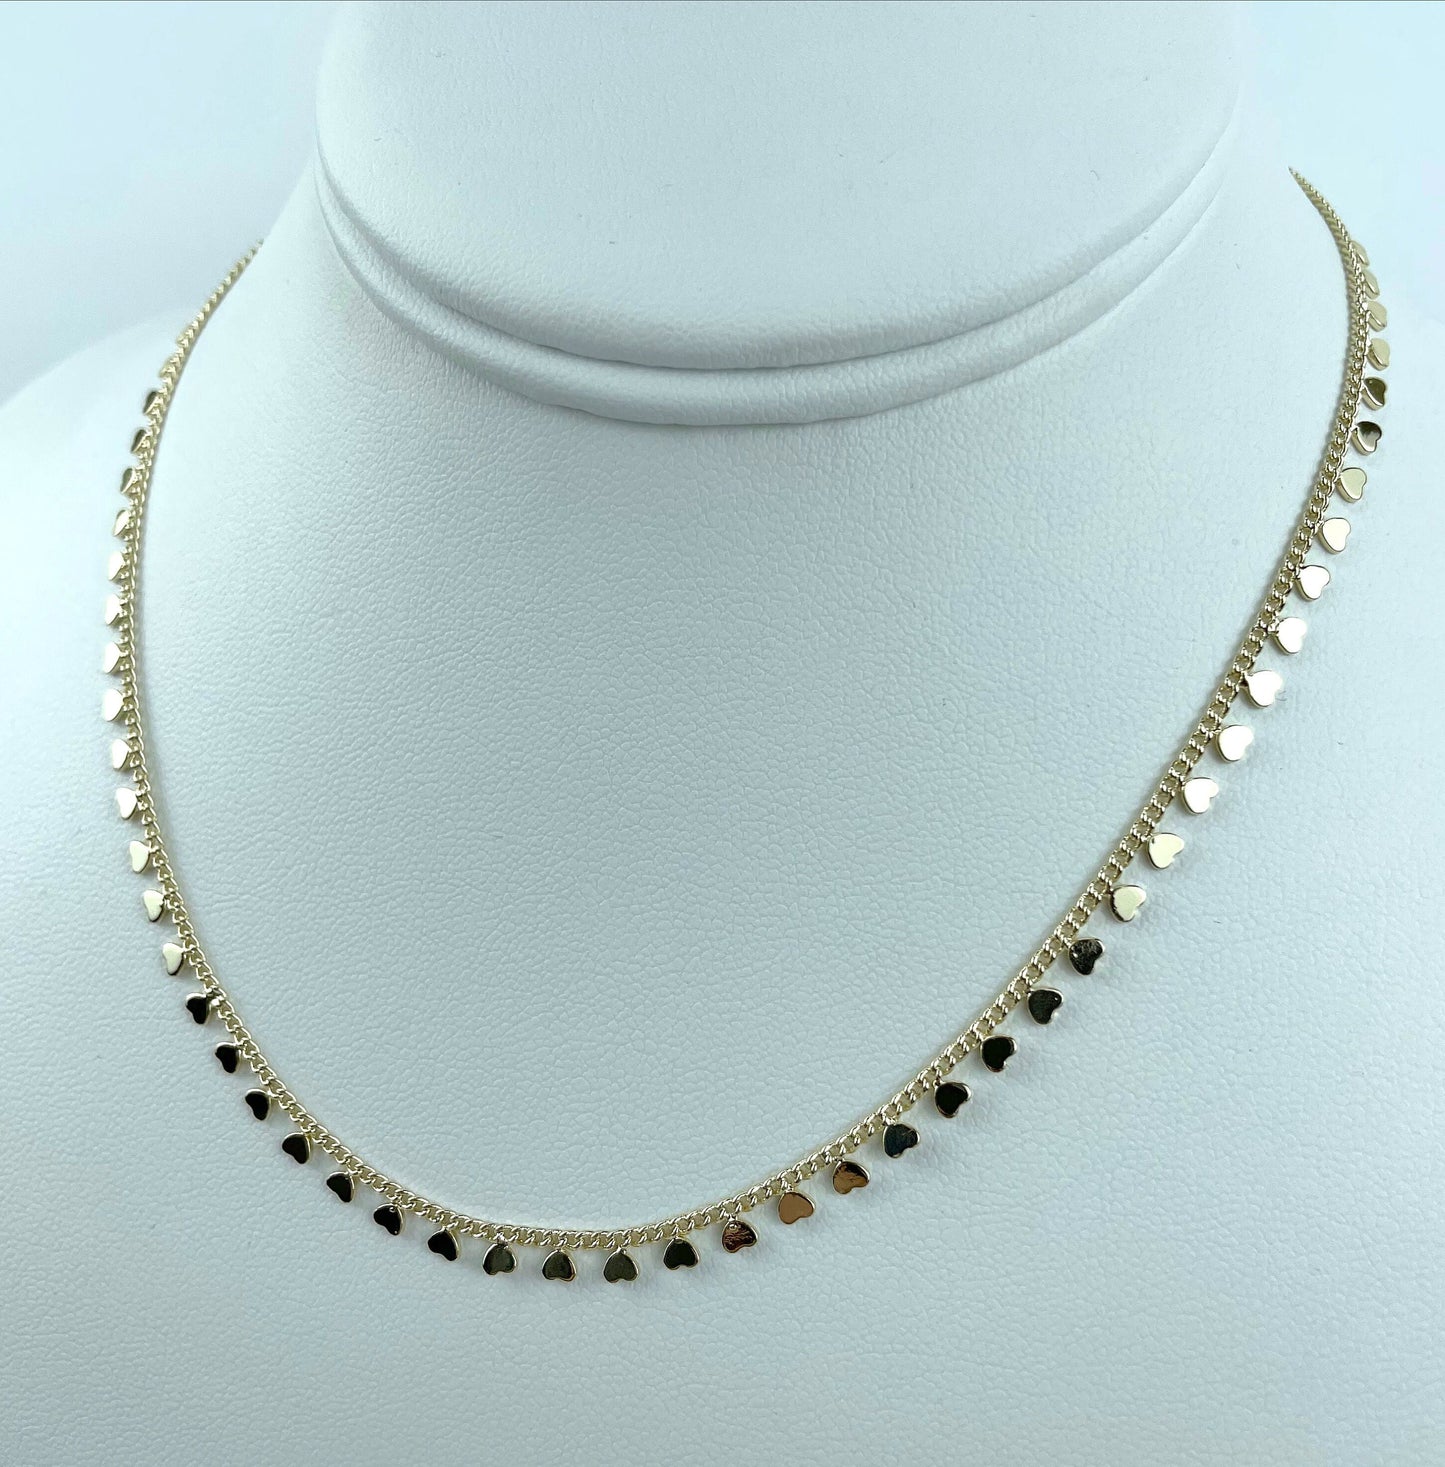 14k Gold Filled 1.6mm Curb Link with Hearts Necklace Bracelet & Anklet Wholesale Jewelry Supplies